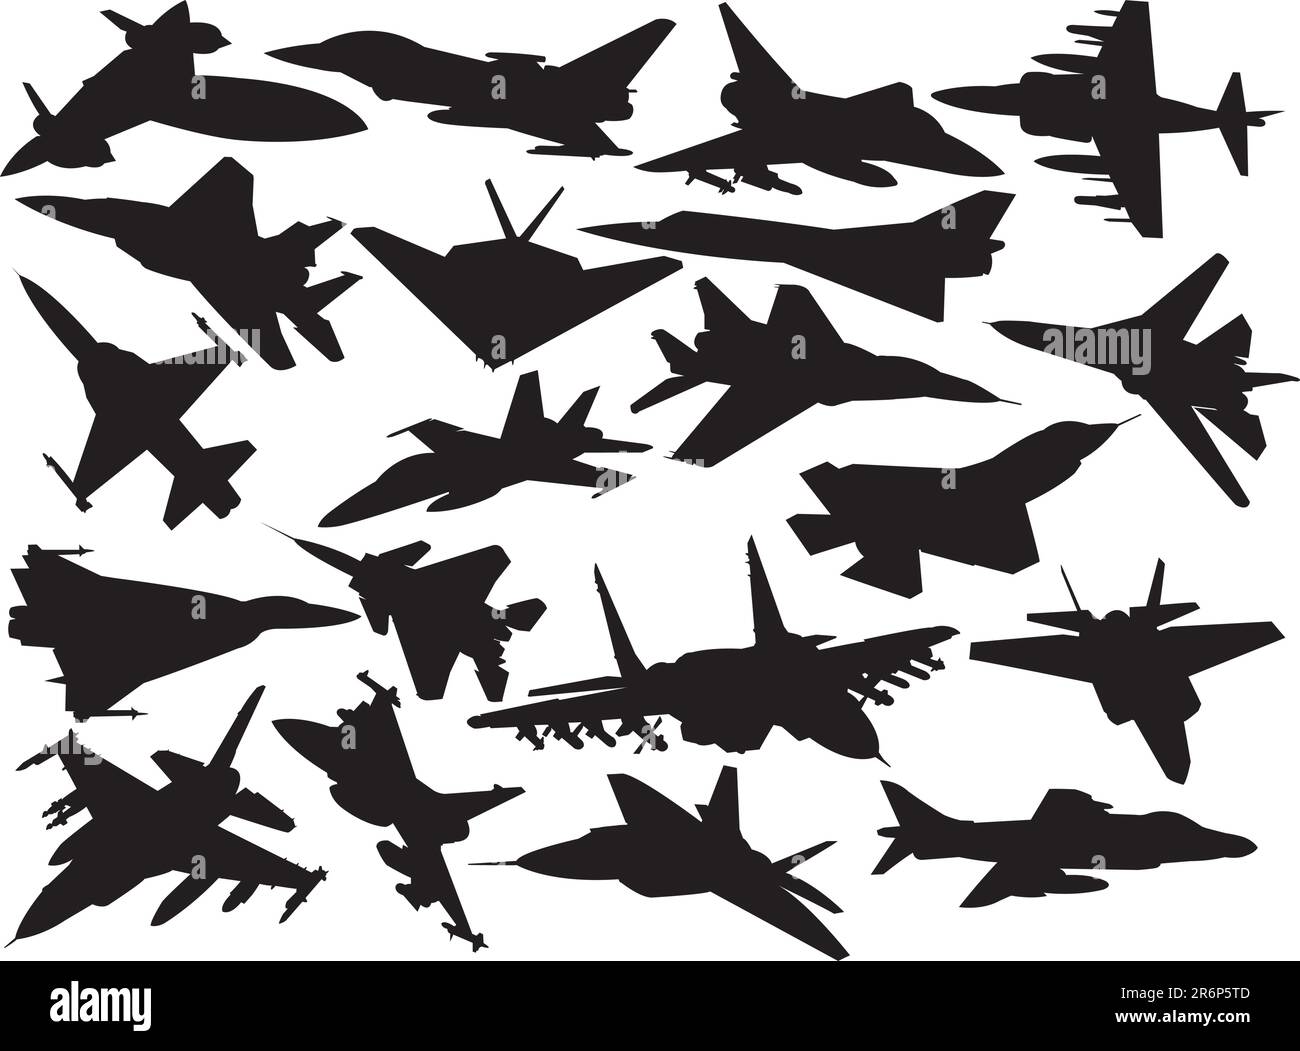 airplanes collection - vector Stock Vector